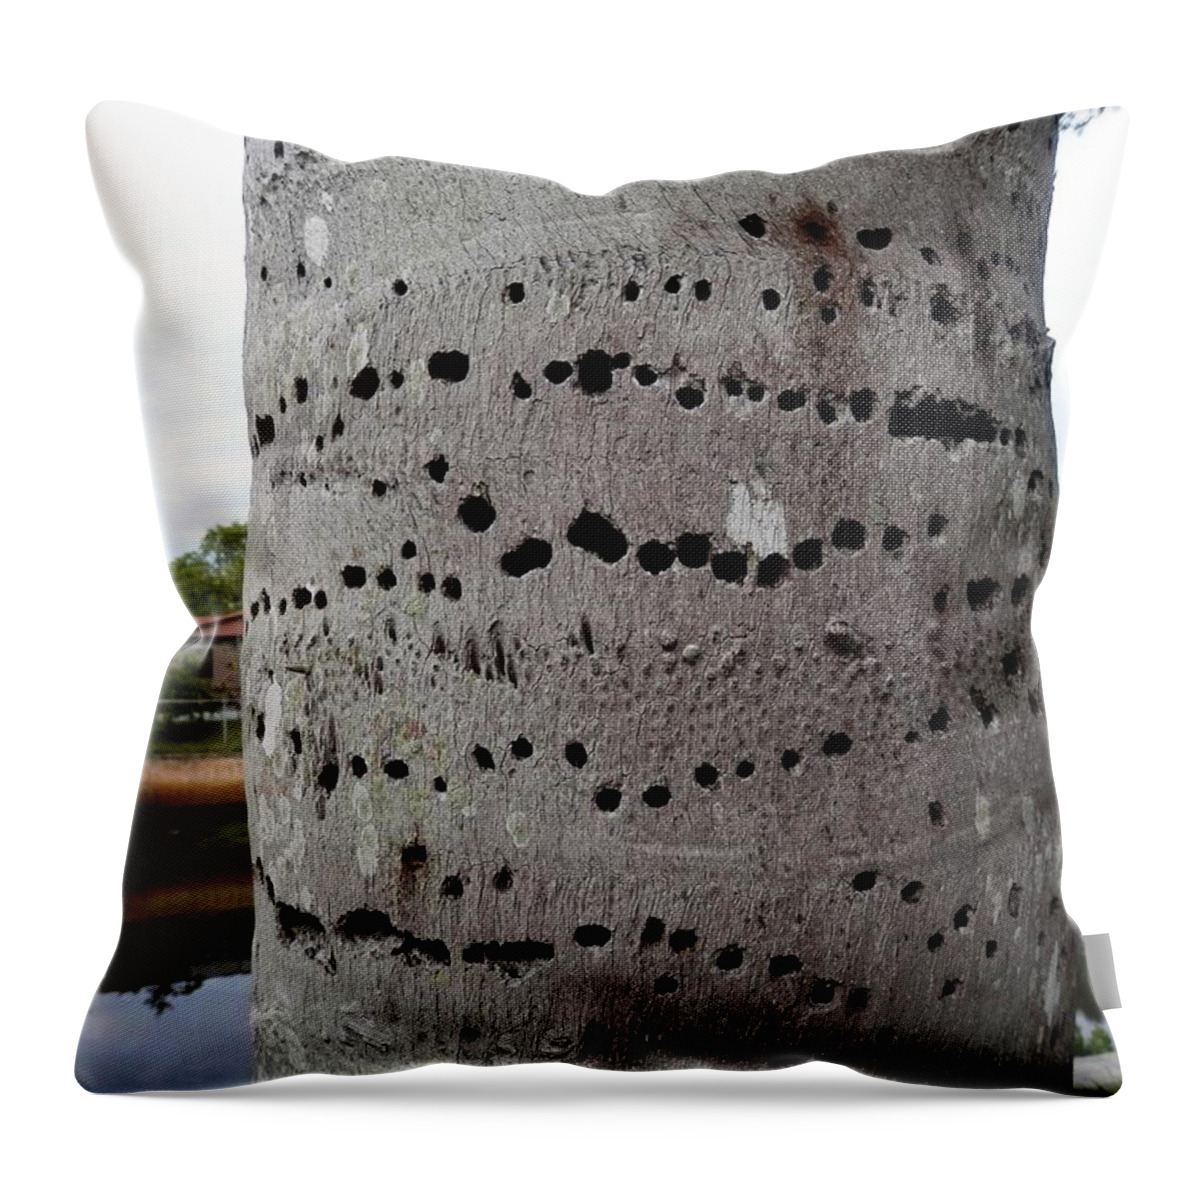 #crazy #woodpecker #holes On #palm Tree In #port Richey #florida #canal Side Throw Pillow featuring the photograph Florida Palm Pecked by Woodpecker by Belinda Lee